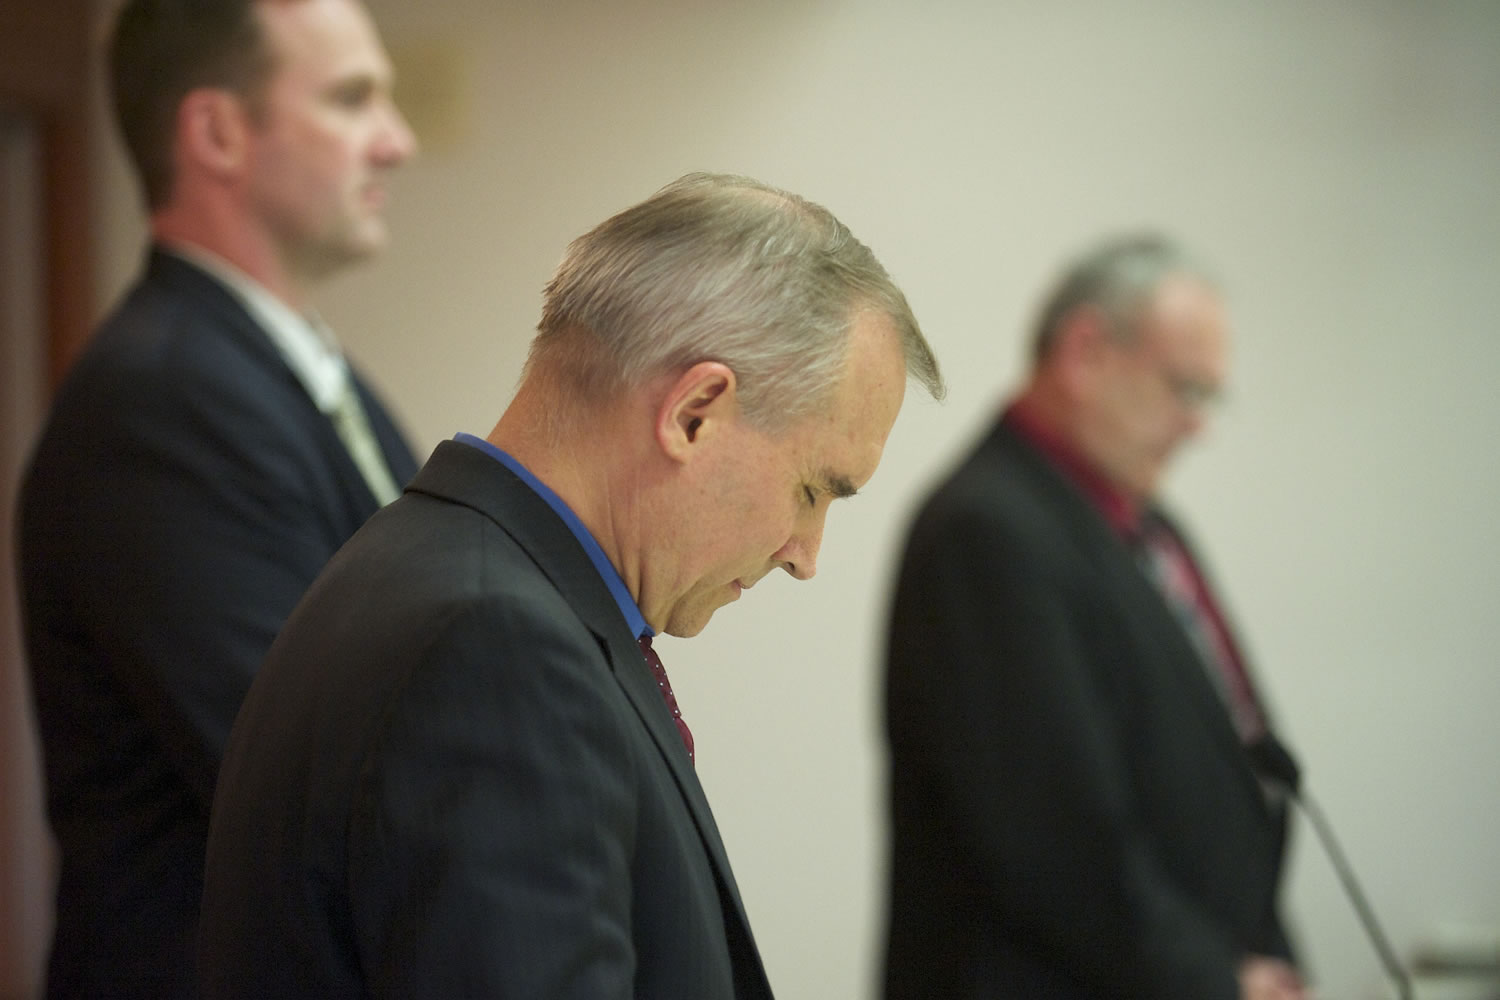 Clark County Commissioners David Madore, from front, Steve Stuart and Tom Mielke pause for prayer before the start of a commissioners meeting at the Clark County Public Services Center earlier this year.